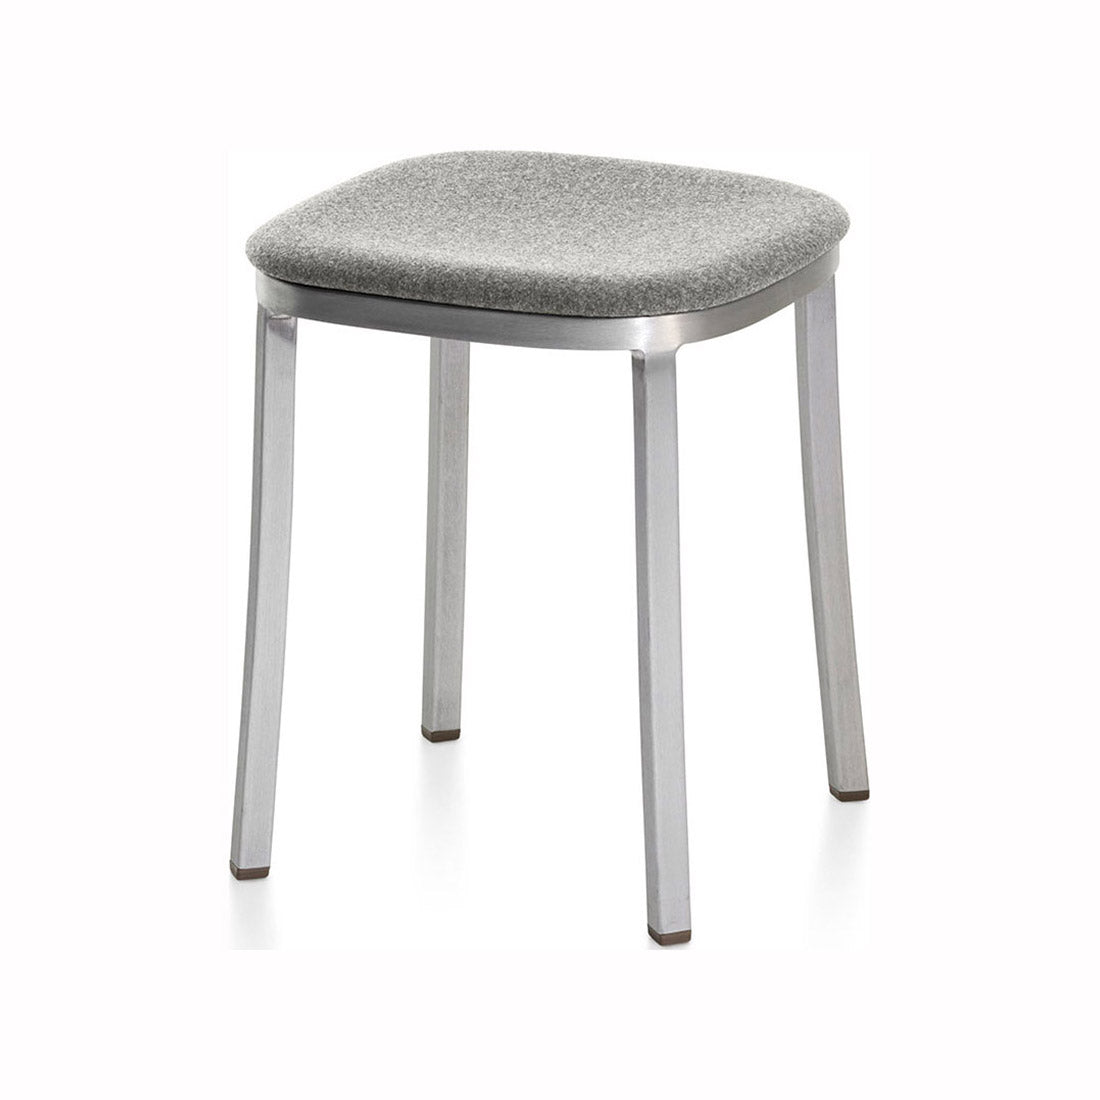 1 Inch Upholstered Low Stool